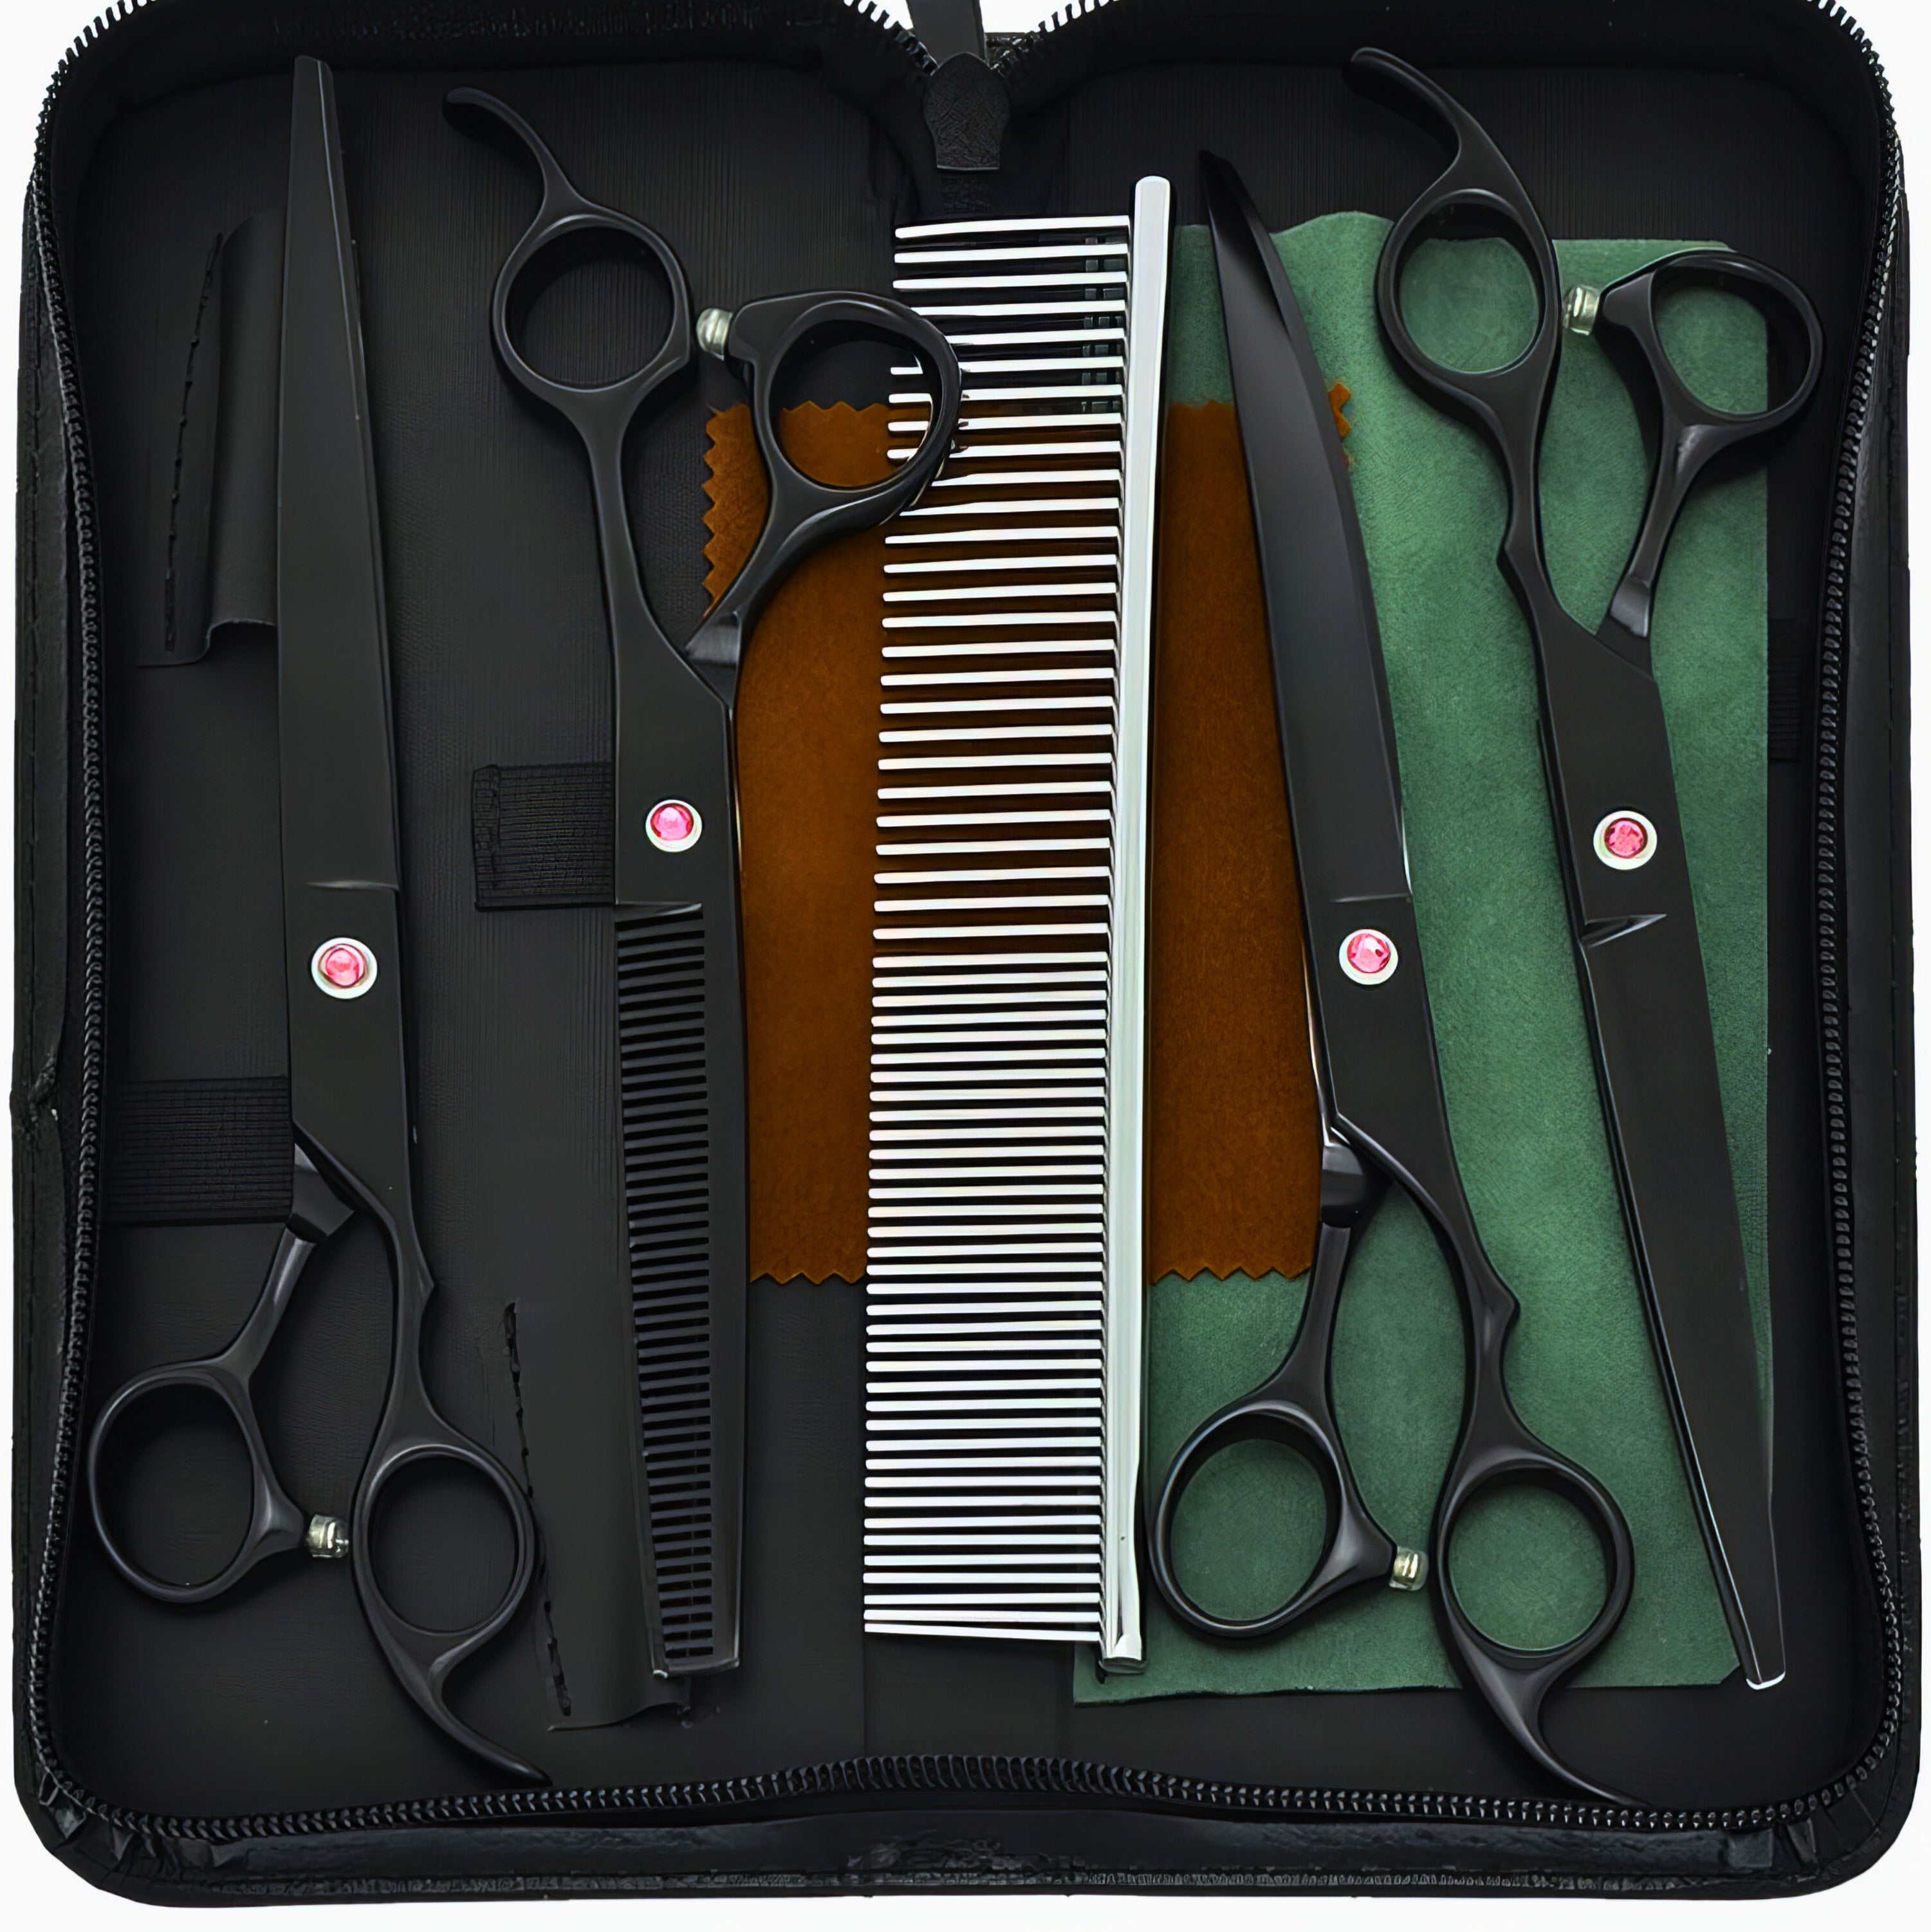 The Dog Grooming Kit